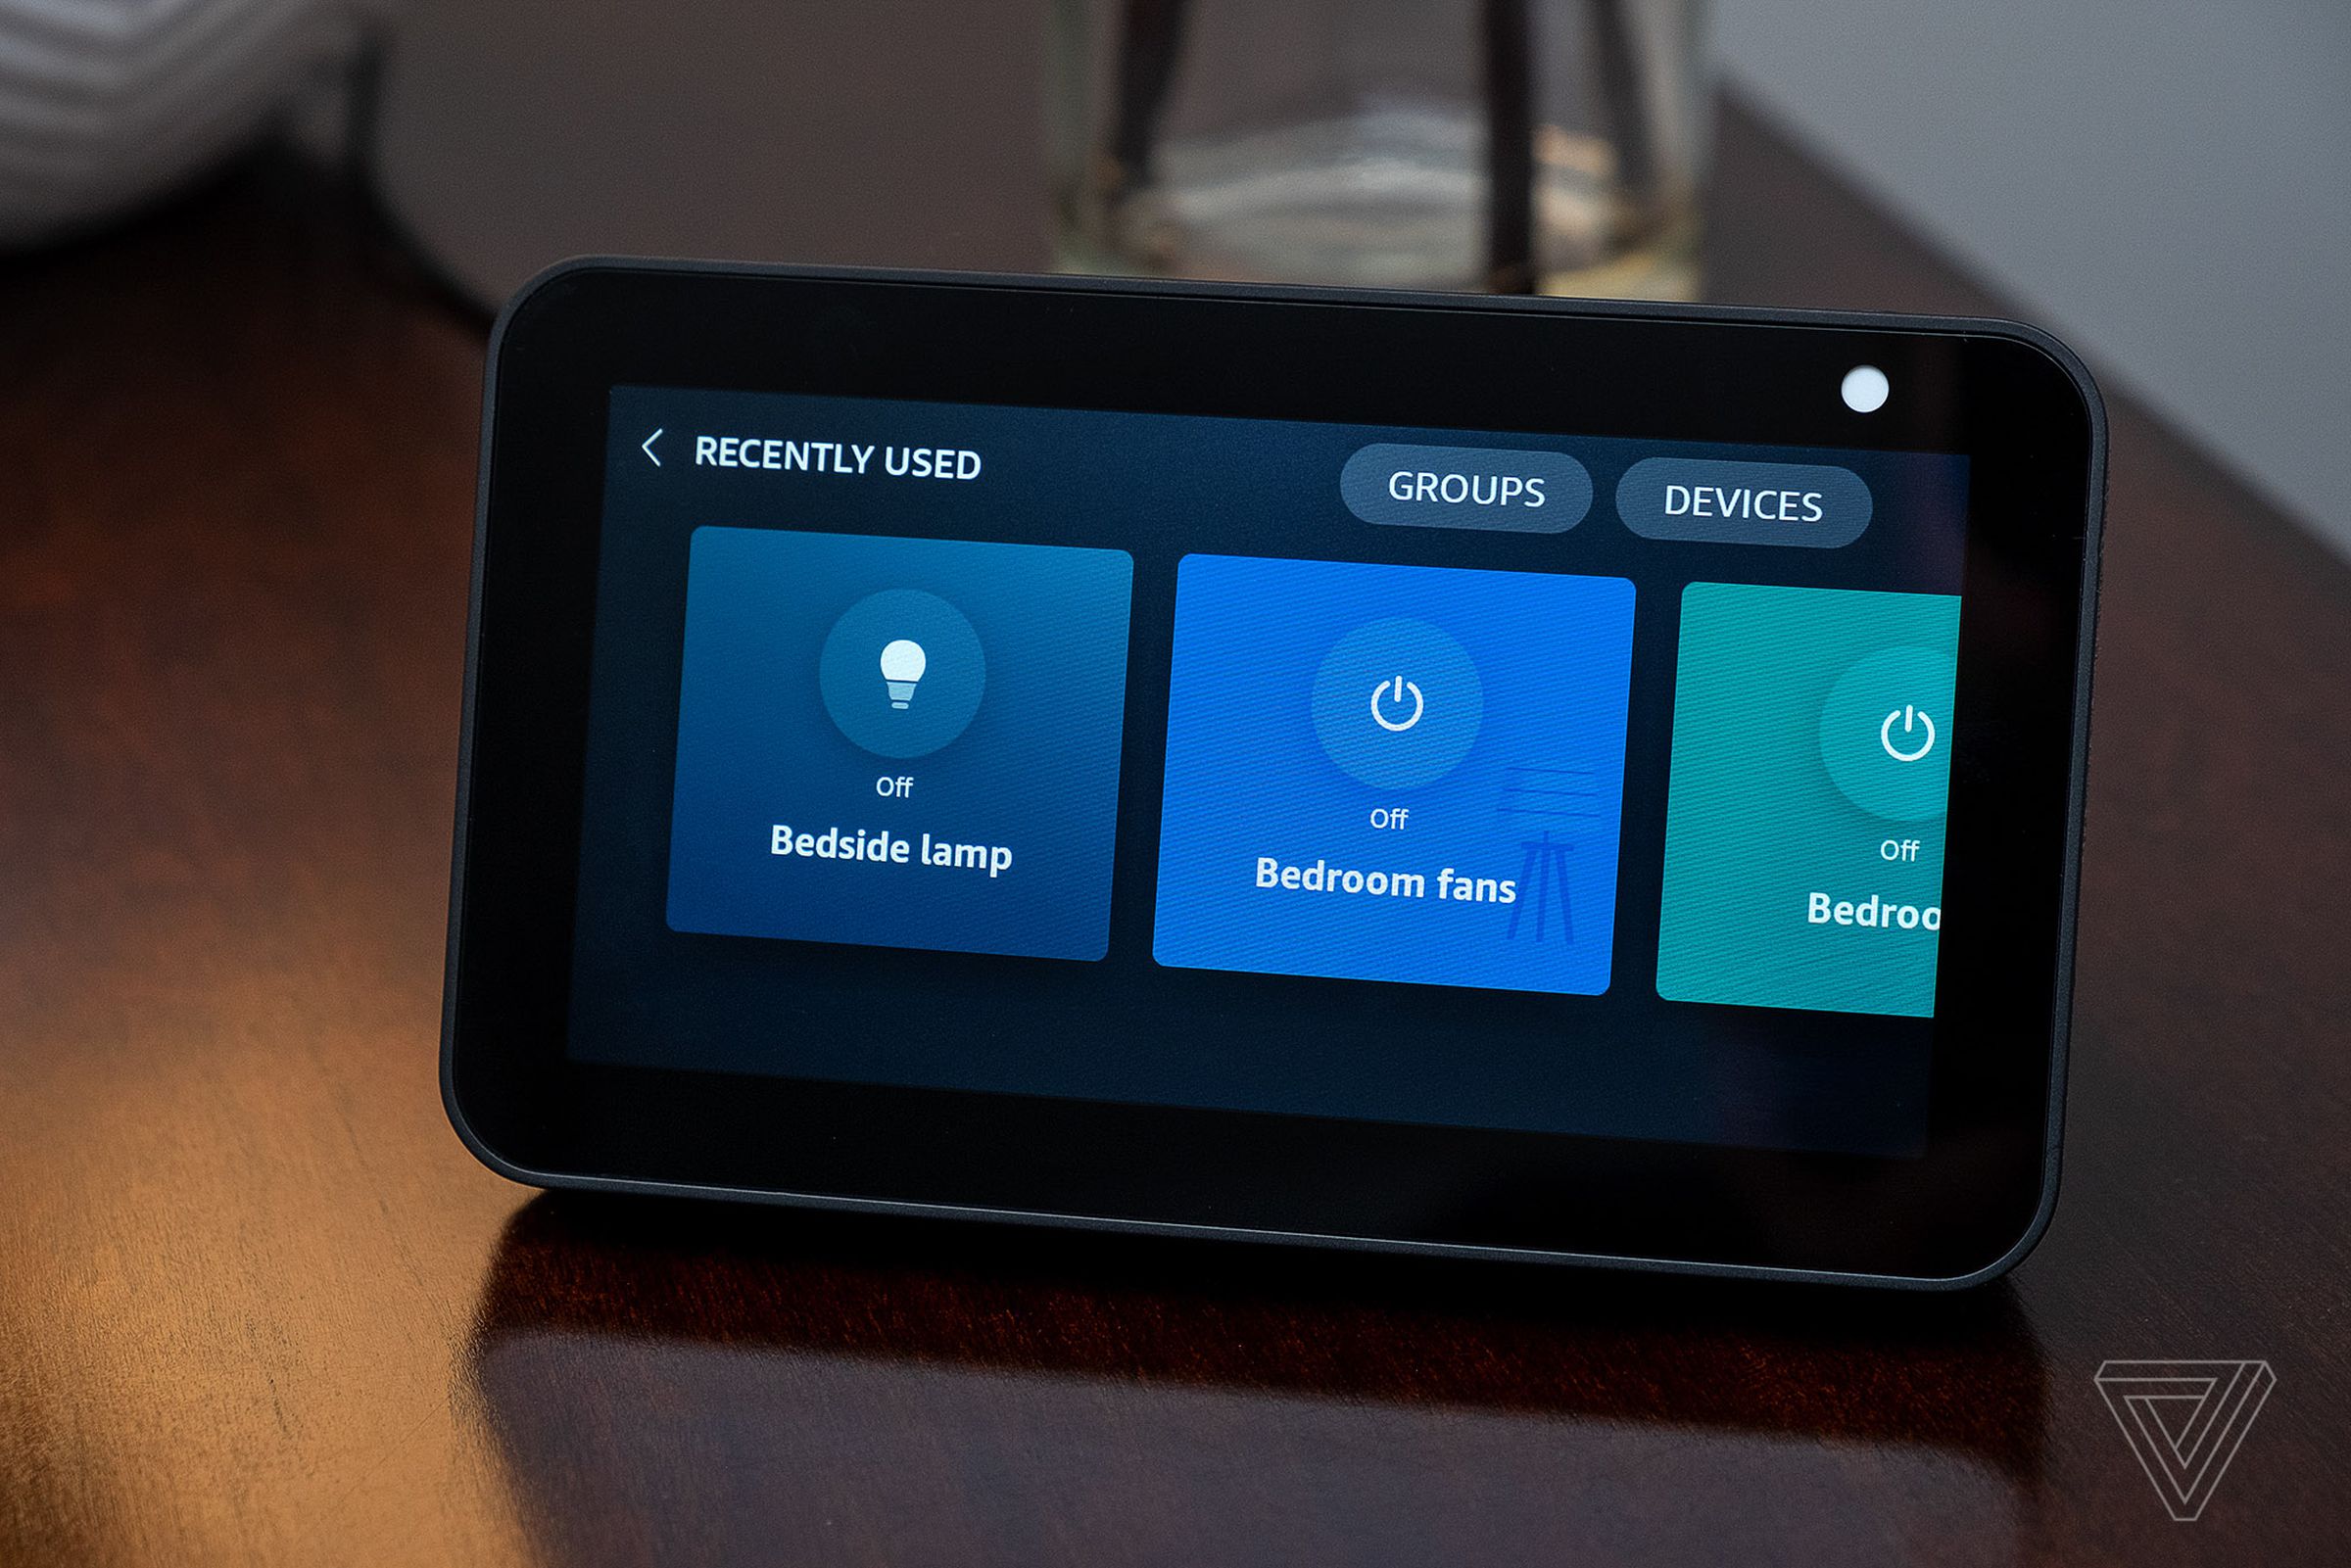 Recently used smart home actions are easily accessible.